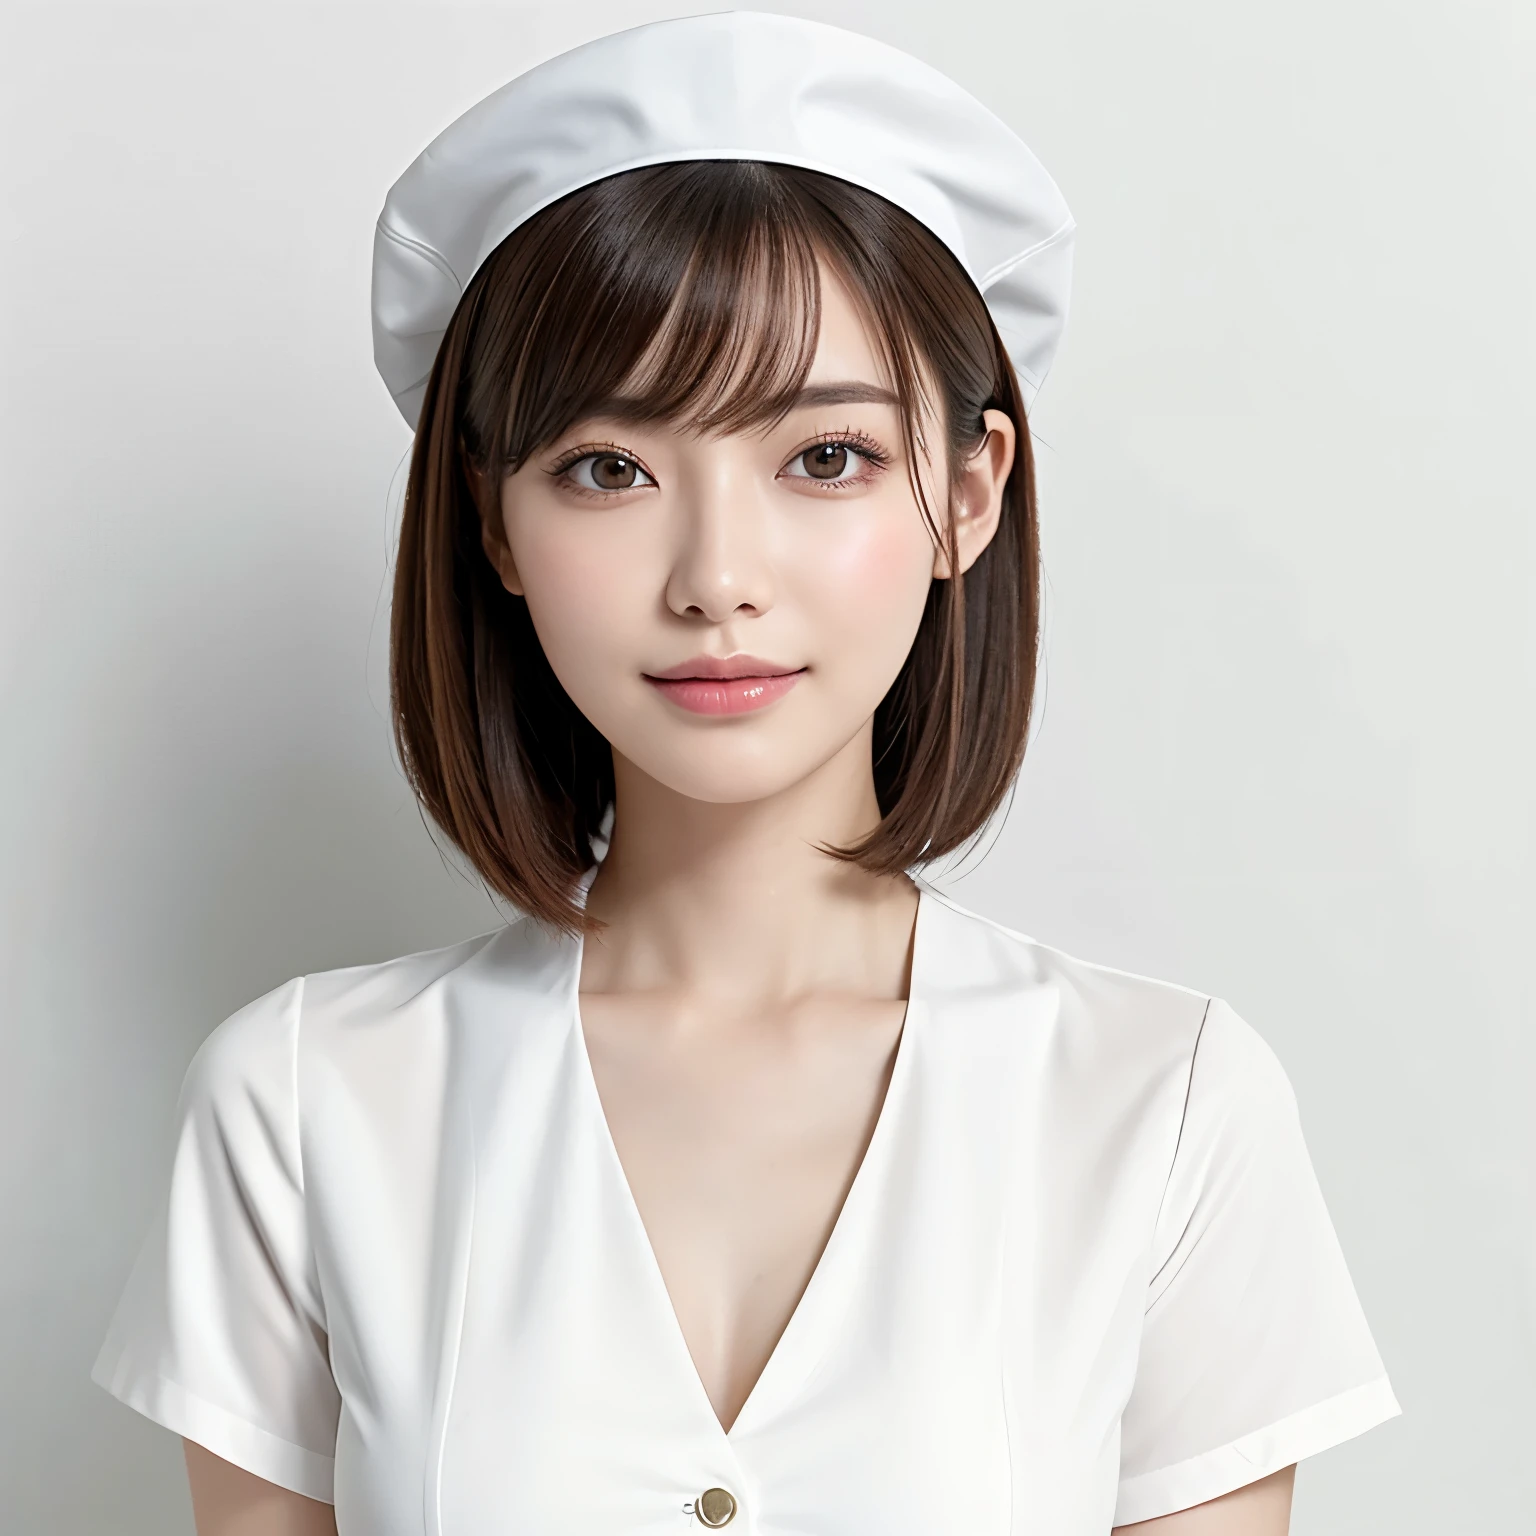 (highest quality、table top、8k、best image quality、Award-winning work)、1 beautiful nurse、(solo:1.1)、straight short hair、perfect bangs、(perfect and most natural nurse uniform:1.2)、(Perfect and most natural plain white nurse cap:1.2)、(the most natural real nurse hat:1.2)、(The simplest pure white background:1.5)、(Perfectly fixed to the front:1.3)、very big breasts、emphasize body line、(Perfect frontal and horizontal portrait of a woman with adequate white space:1.3)、(Depicting a woman perfectly horizontally and frontally:1.3)、beautiful and detailed eyes、look at me and smile、(Upright photo from the chest up:1.3)、(Please turn and look straight at me:1.3)、elegant makeup、Ultra high definition beauty face、ultra high definition hair、Super high-definition sparkling eyes、Super high resolution glossy lips、accurate anatomy、very beautiful skin、Super high-definition glowing beautiful skin、Graceful upright posture seen from the front、(very bright:1.3)